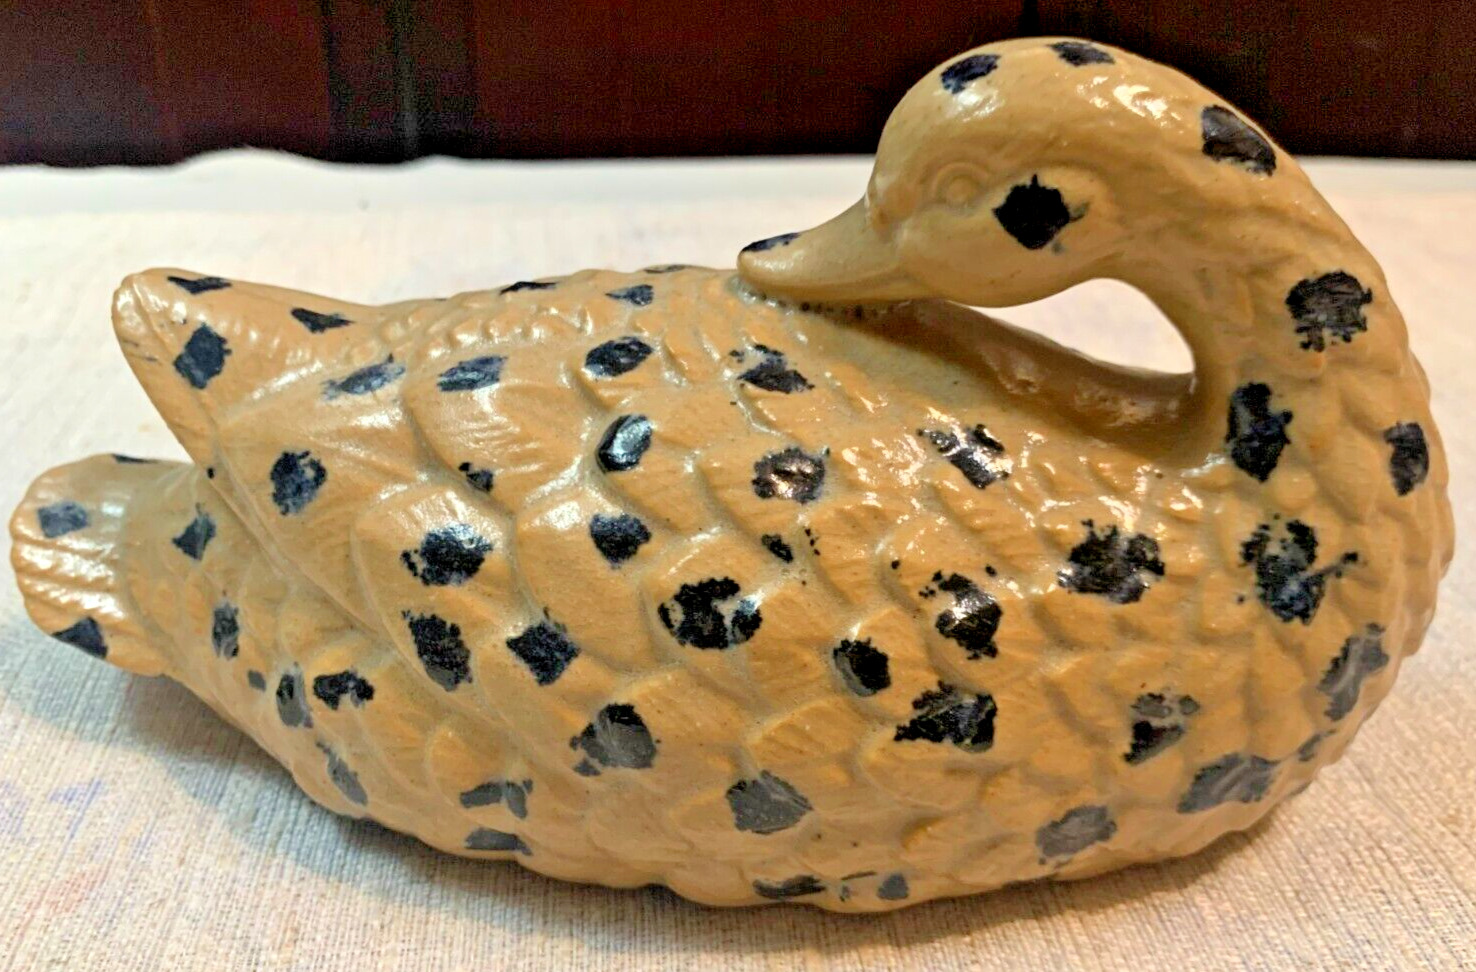 Authentic RUTLAND POTTERY by MANN Spotted CERAMIC DUCK 1980- Japan Rare